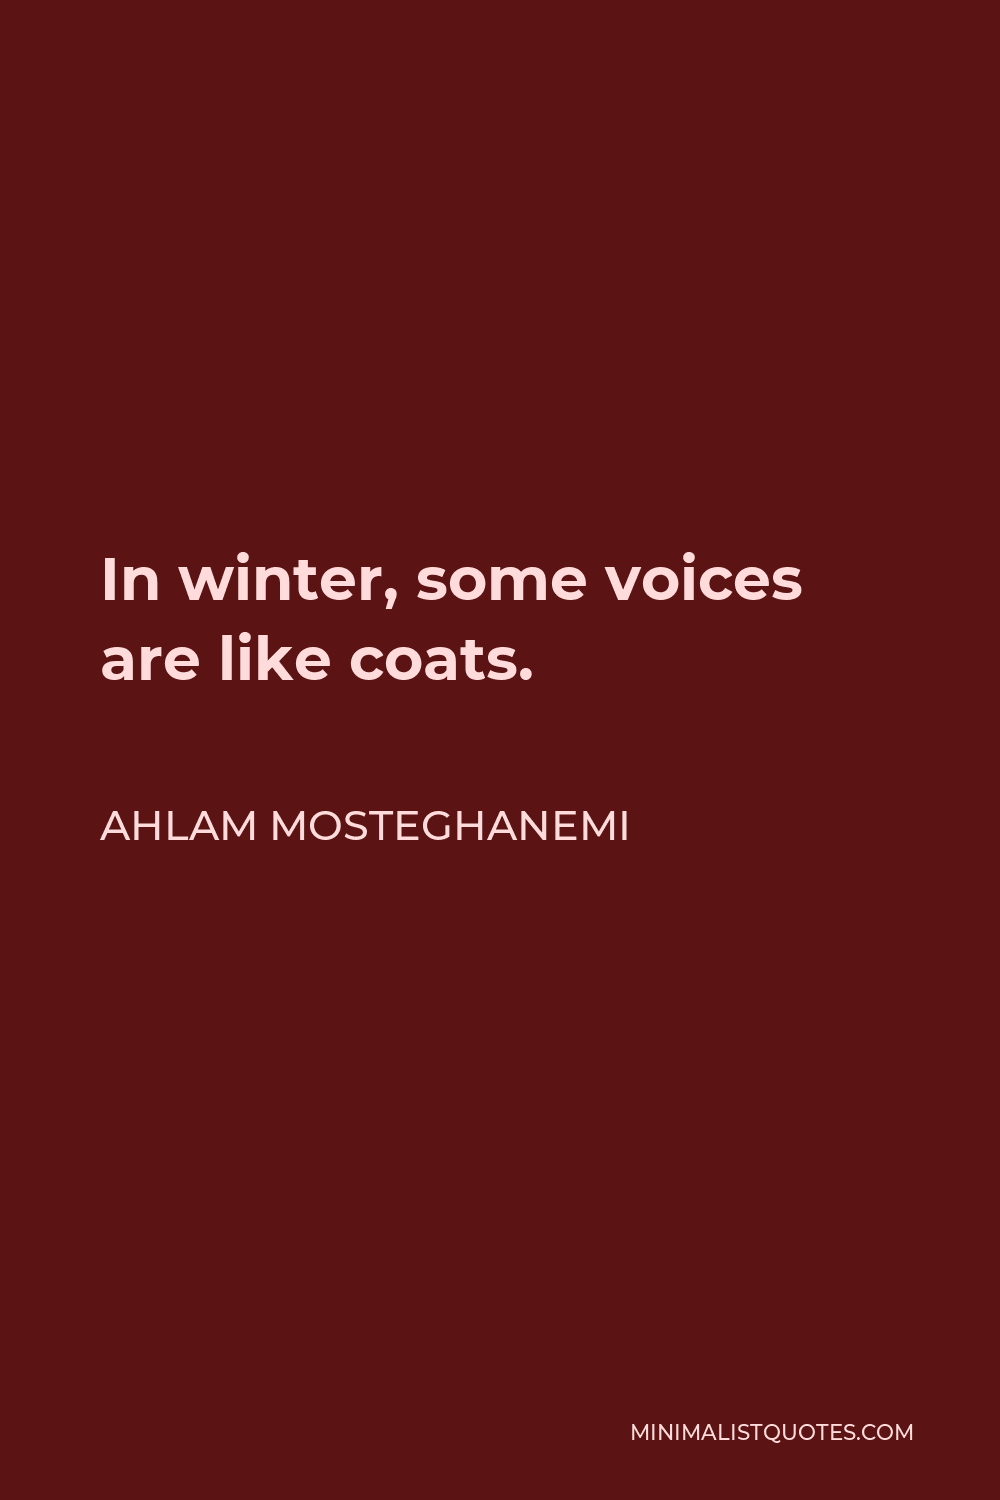 Ahlam Mosteghanemi Quote - In winter, some voices are like coats.